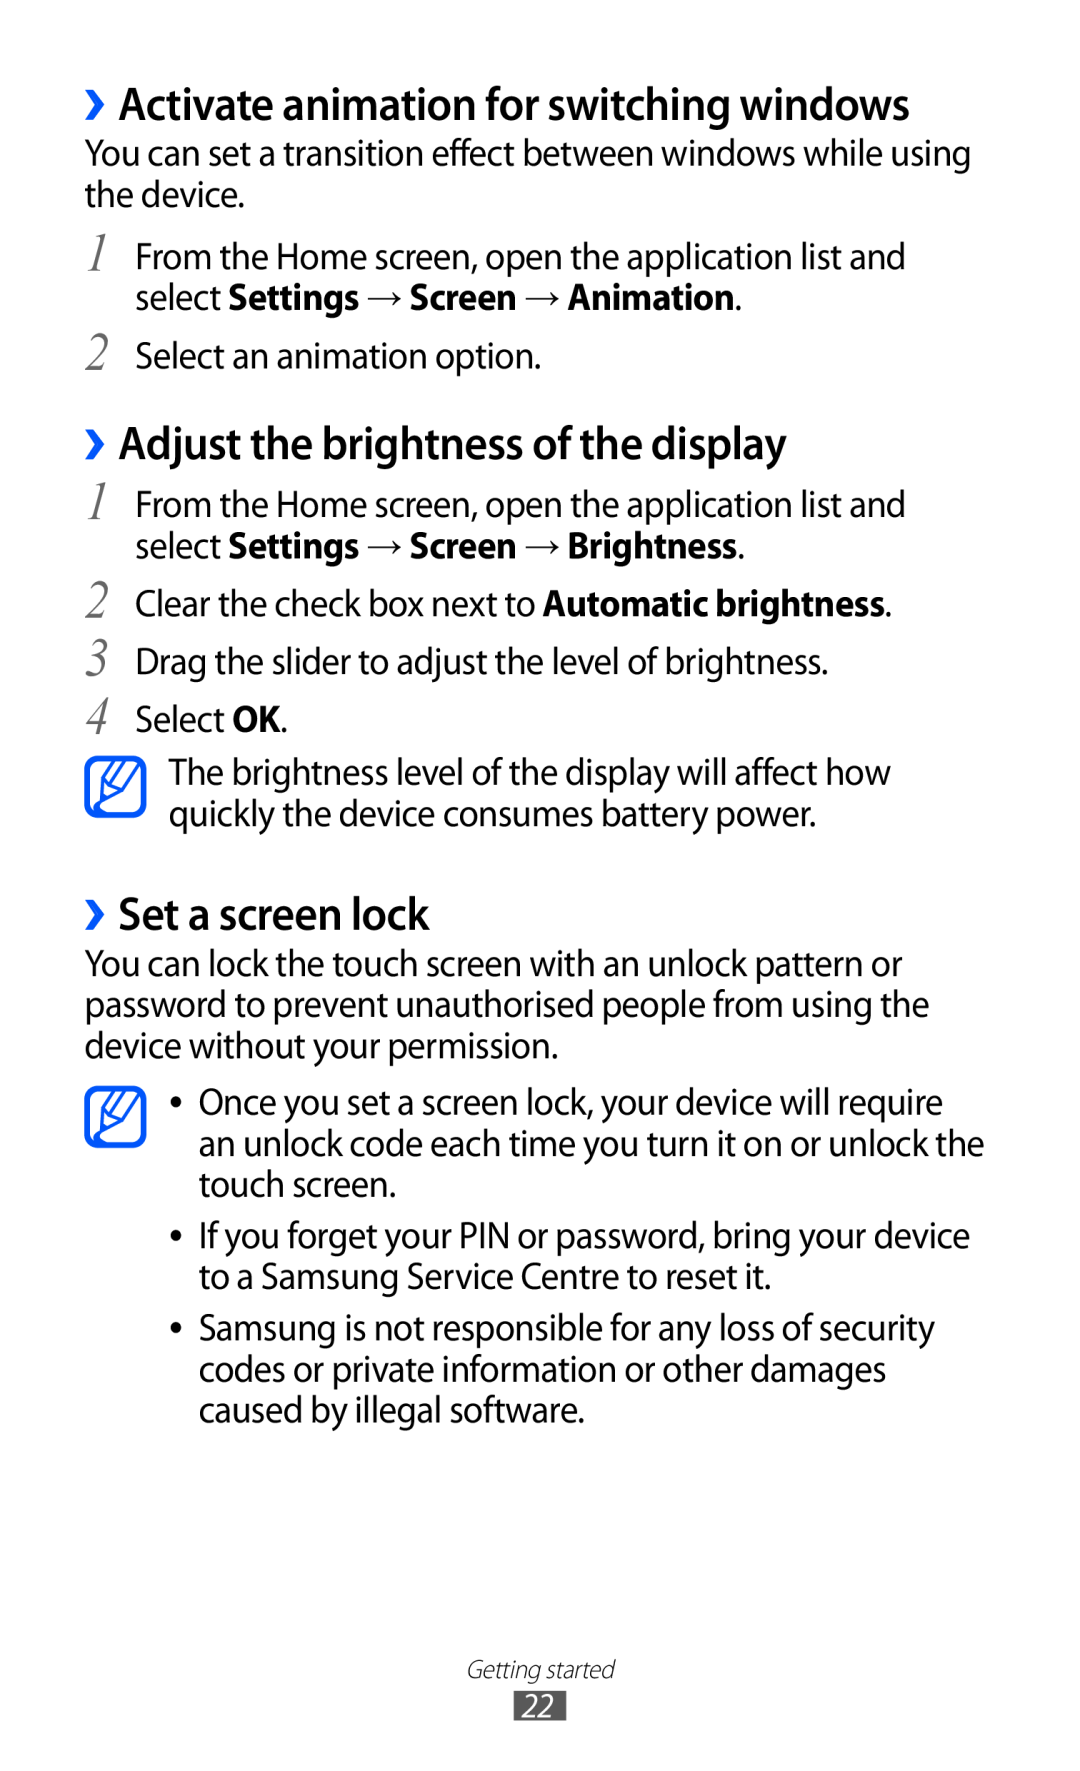 Samsung GT-P7510 ››Activate animation for switching windows, ››Adjust the brightness of the display, ››Set a screen lock 